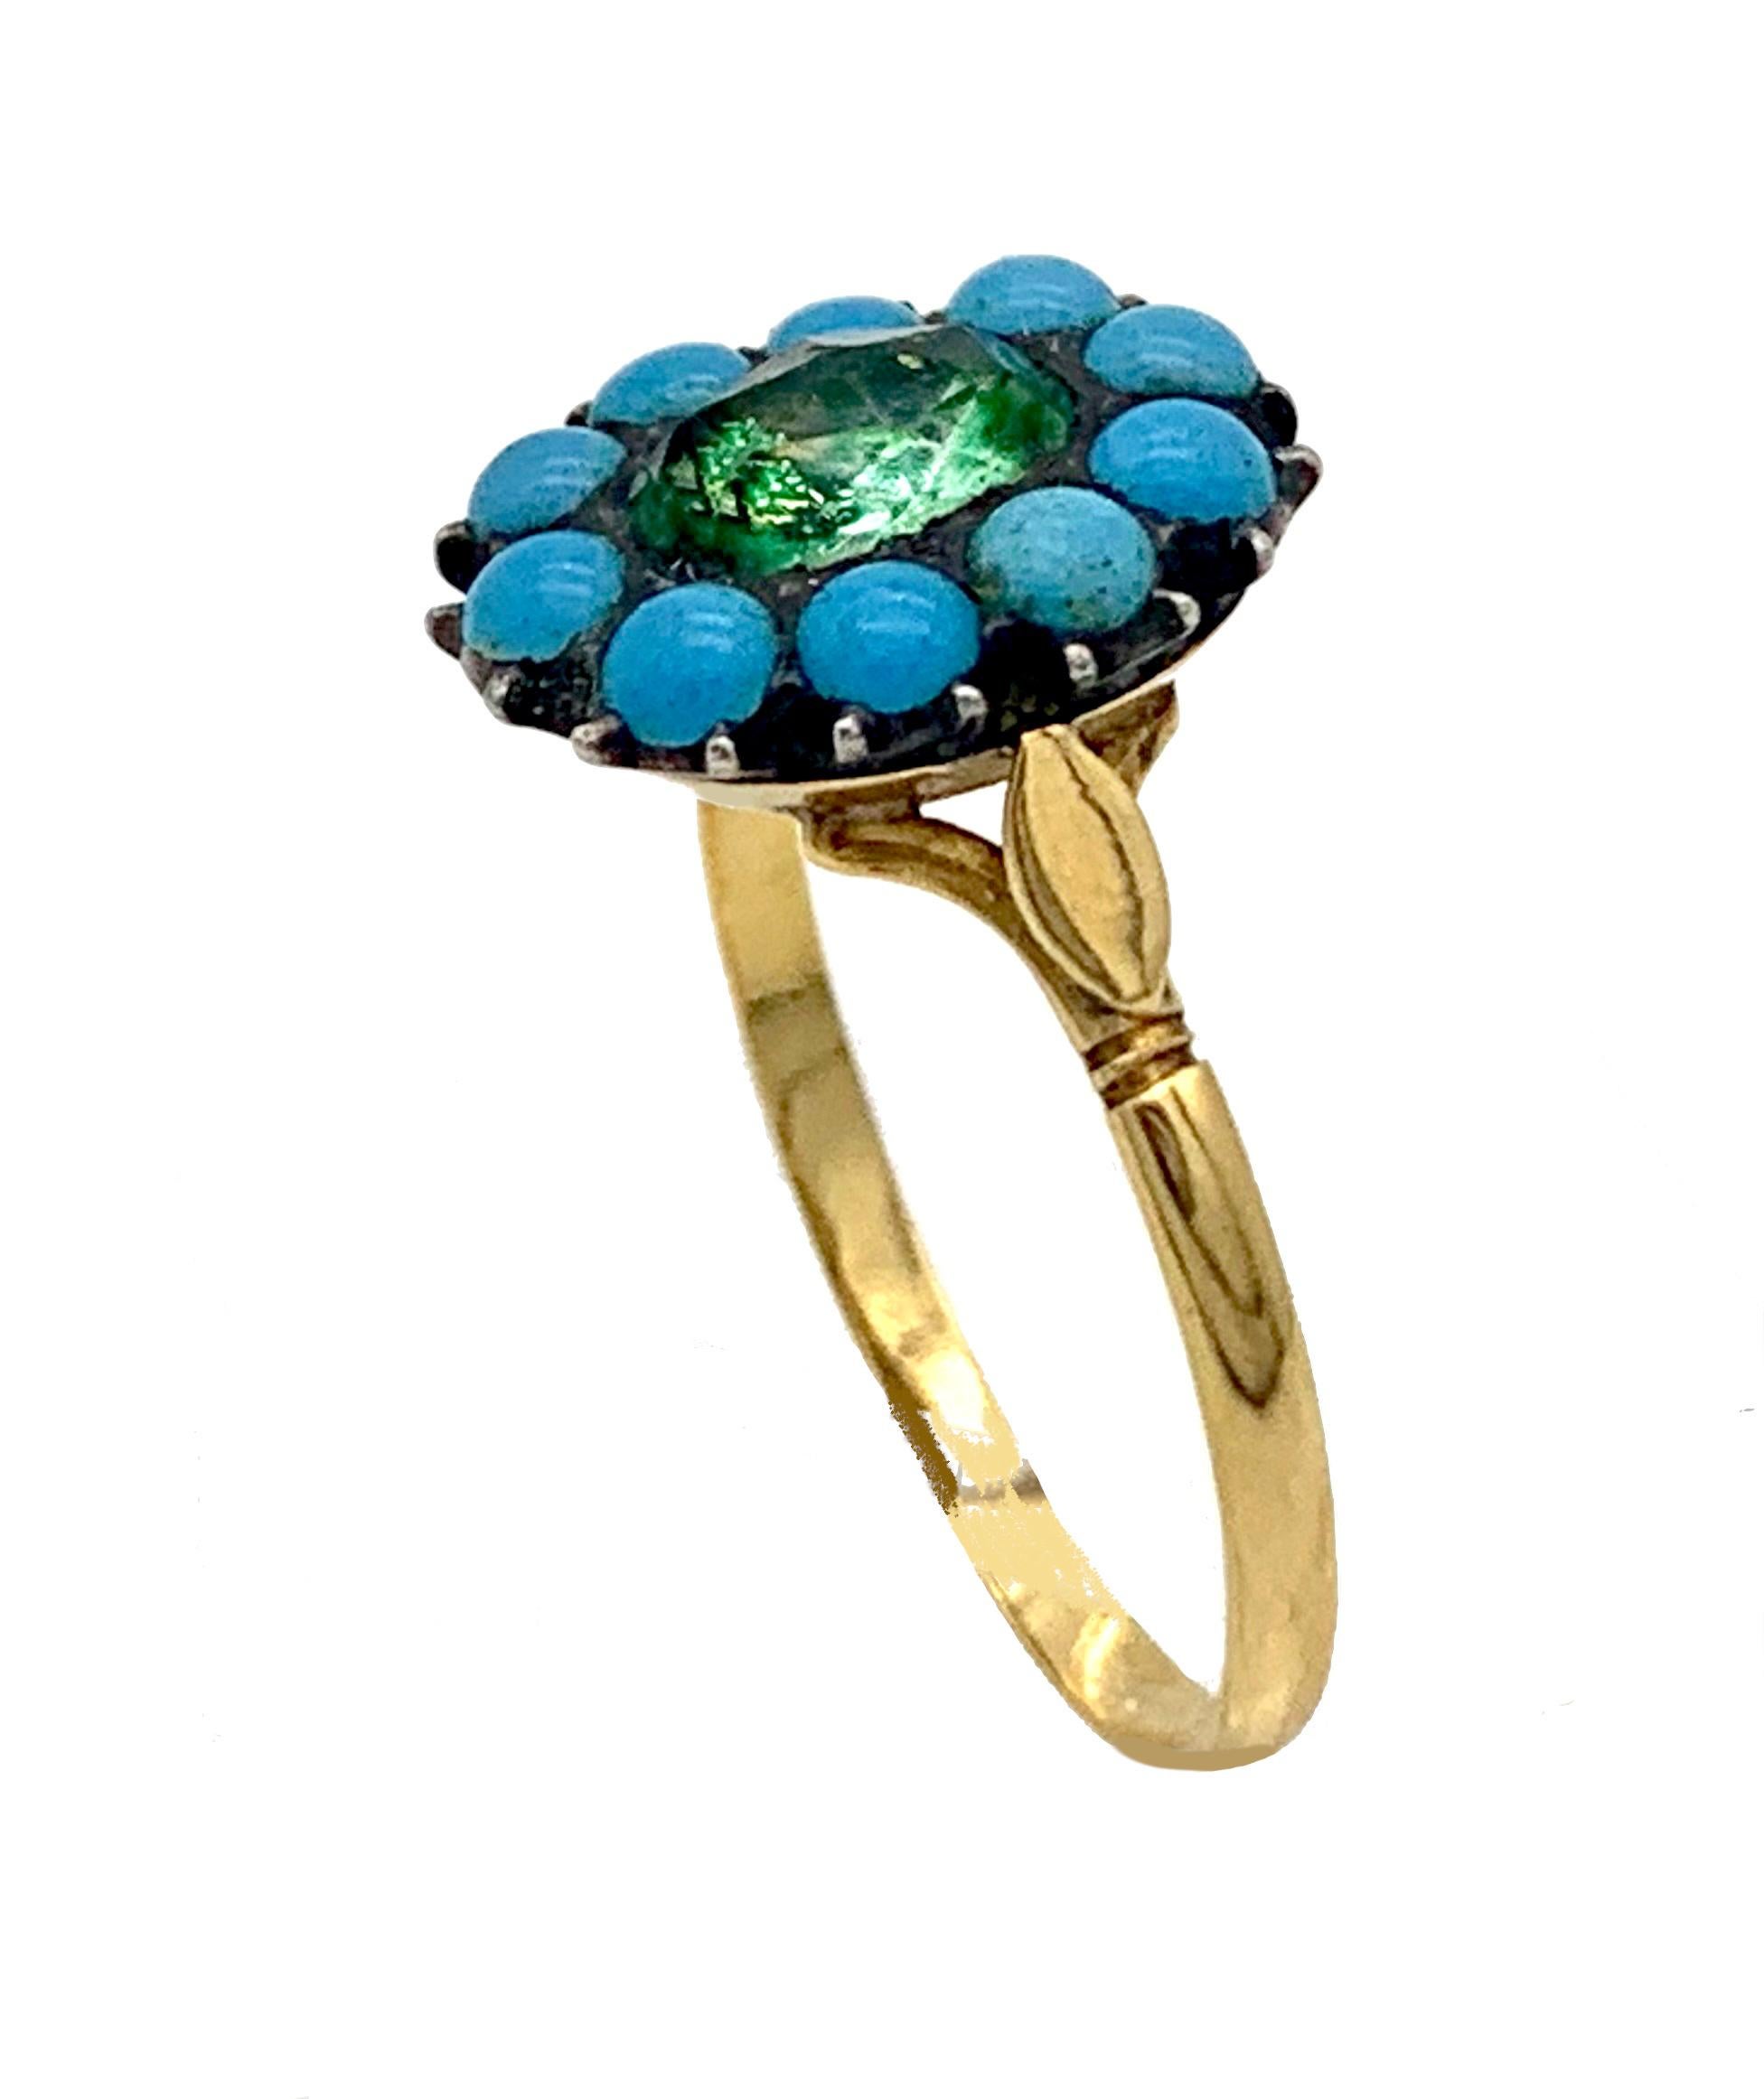 This delicate gold ring was created towards the end of the eighteenth century out of 15 karat gold. The ring head is designed as a flower. In the center we see an oval facetted paste stone that has been mounted over green foil. It is surrounded by